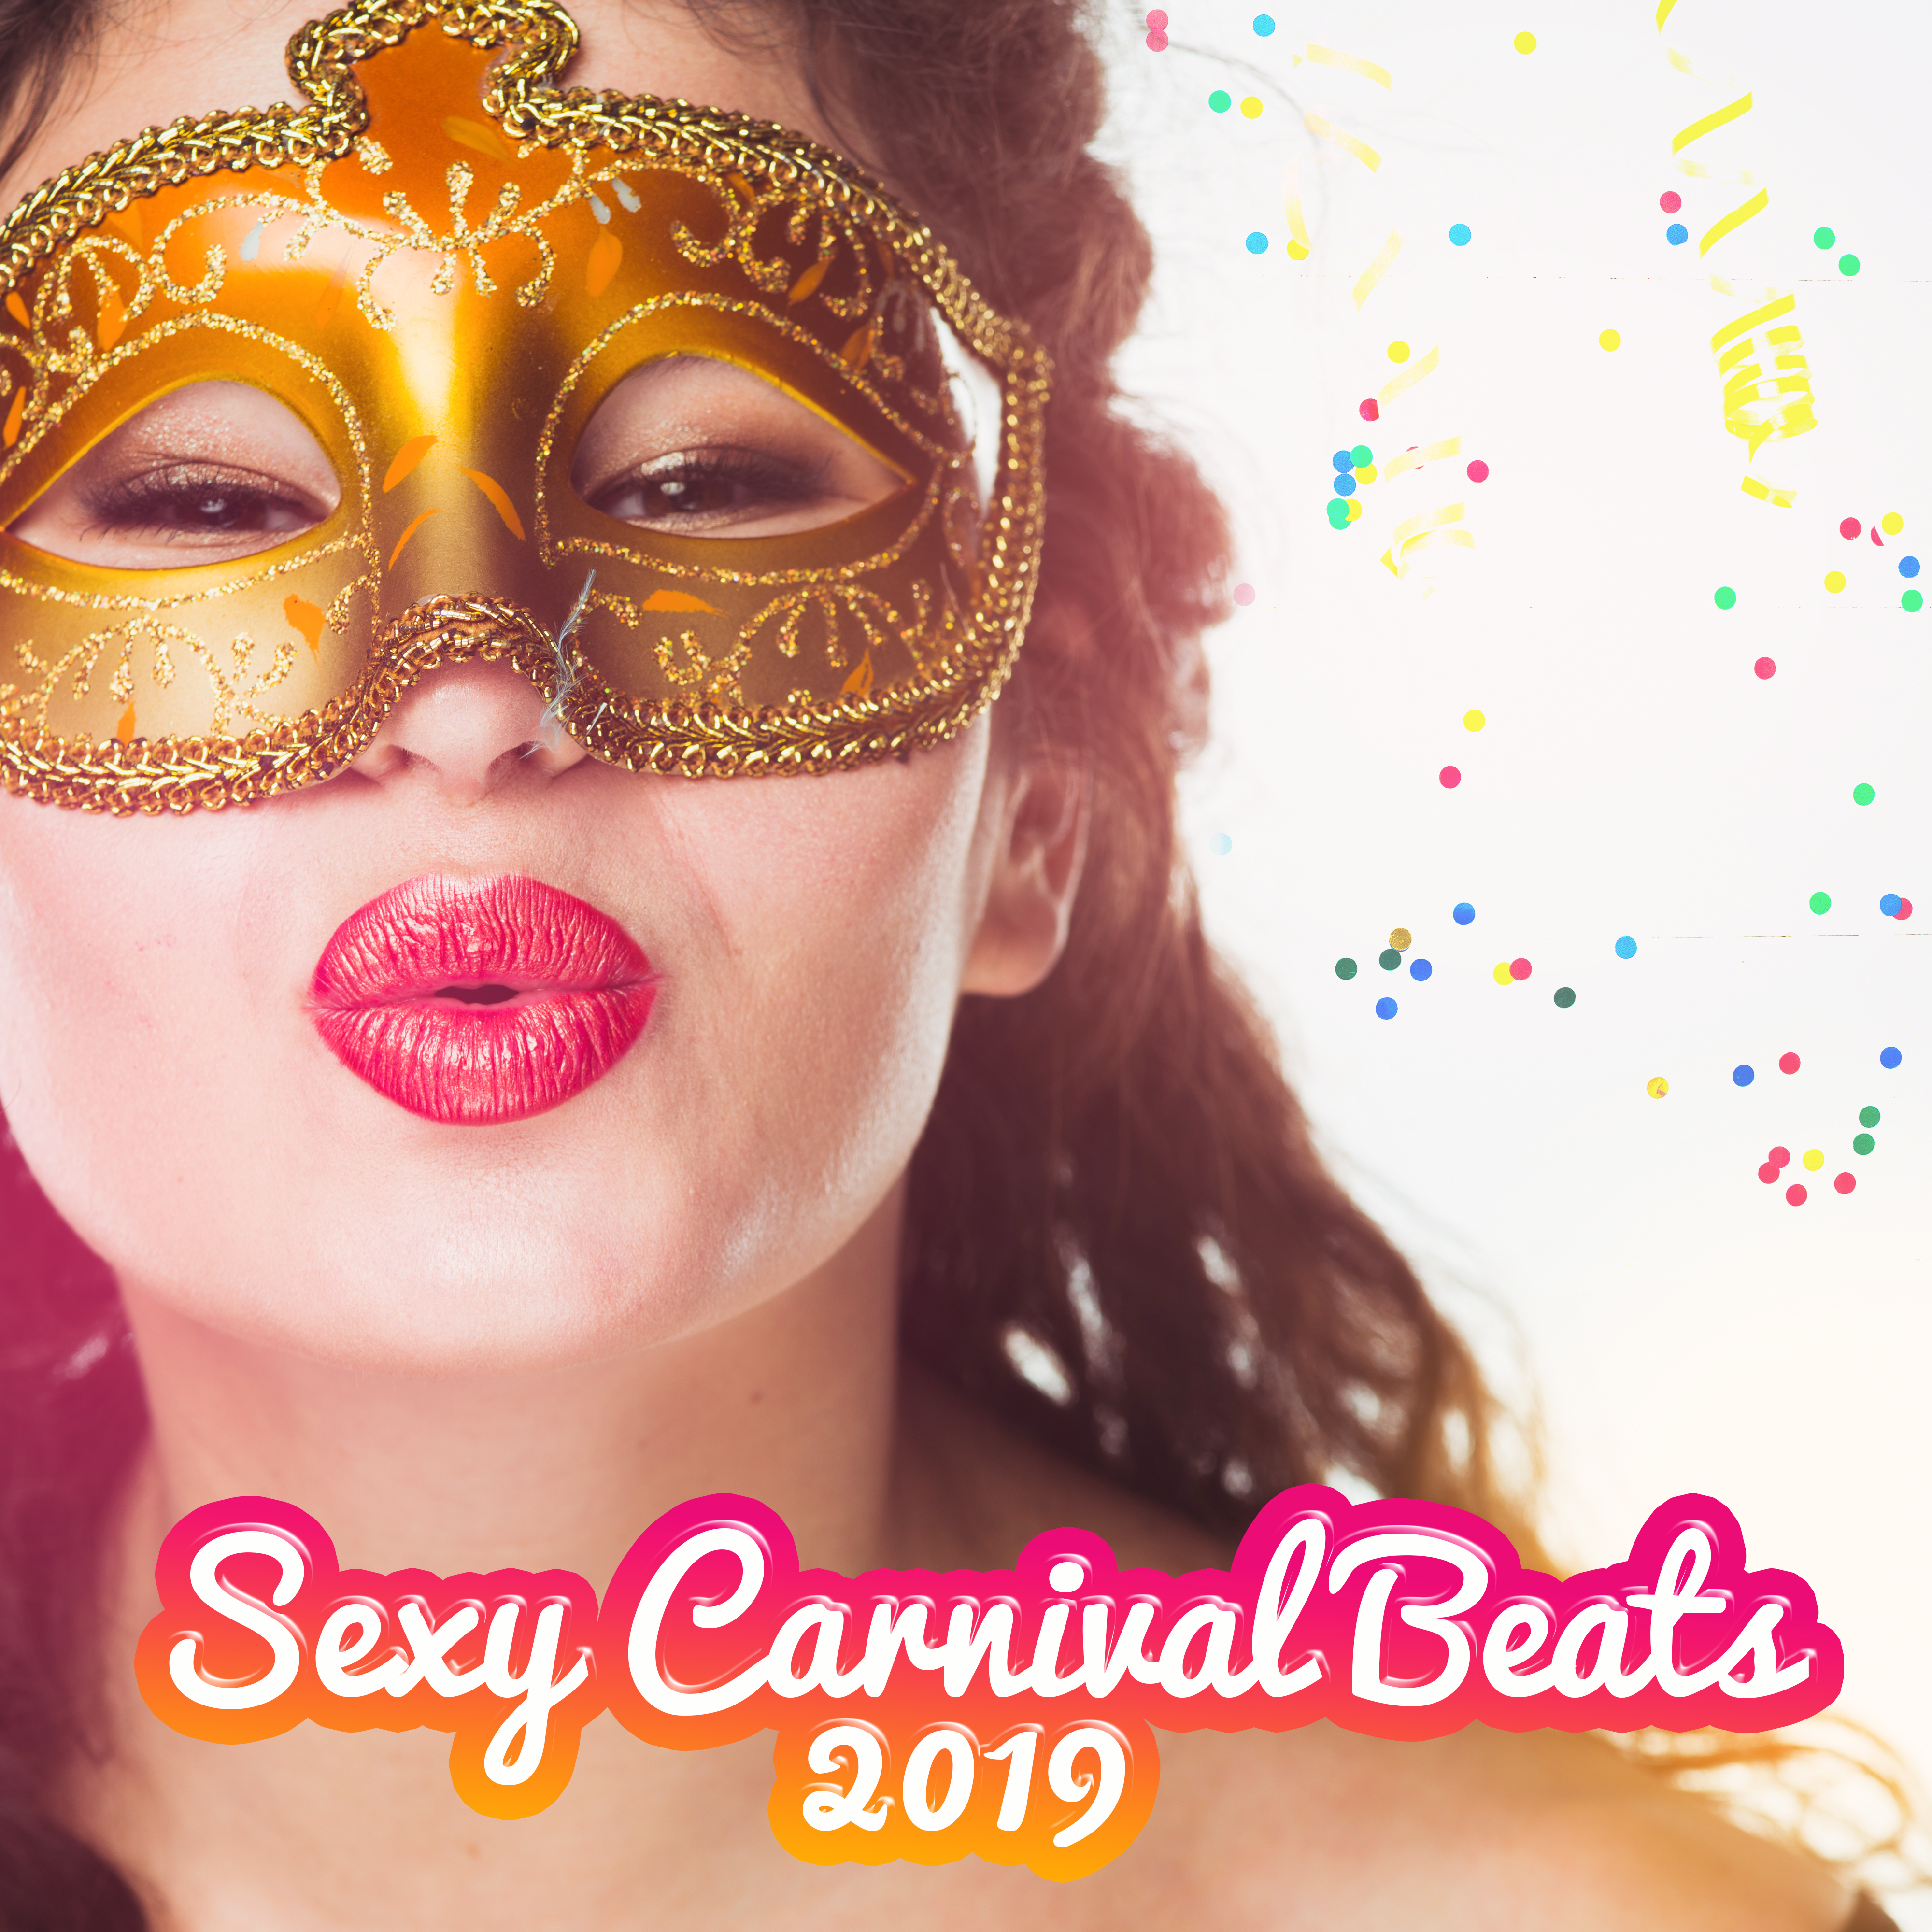 **** Carnival Beats 2019 – Dance Music, **** Chill Out, Carnival Party, Chillout 2019